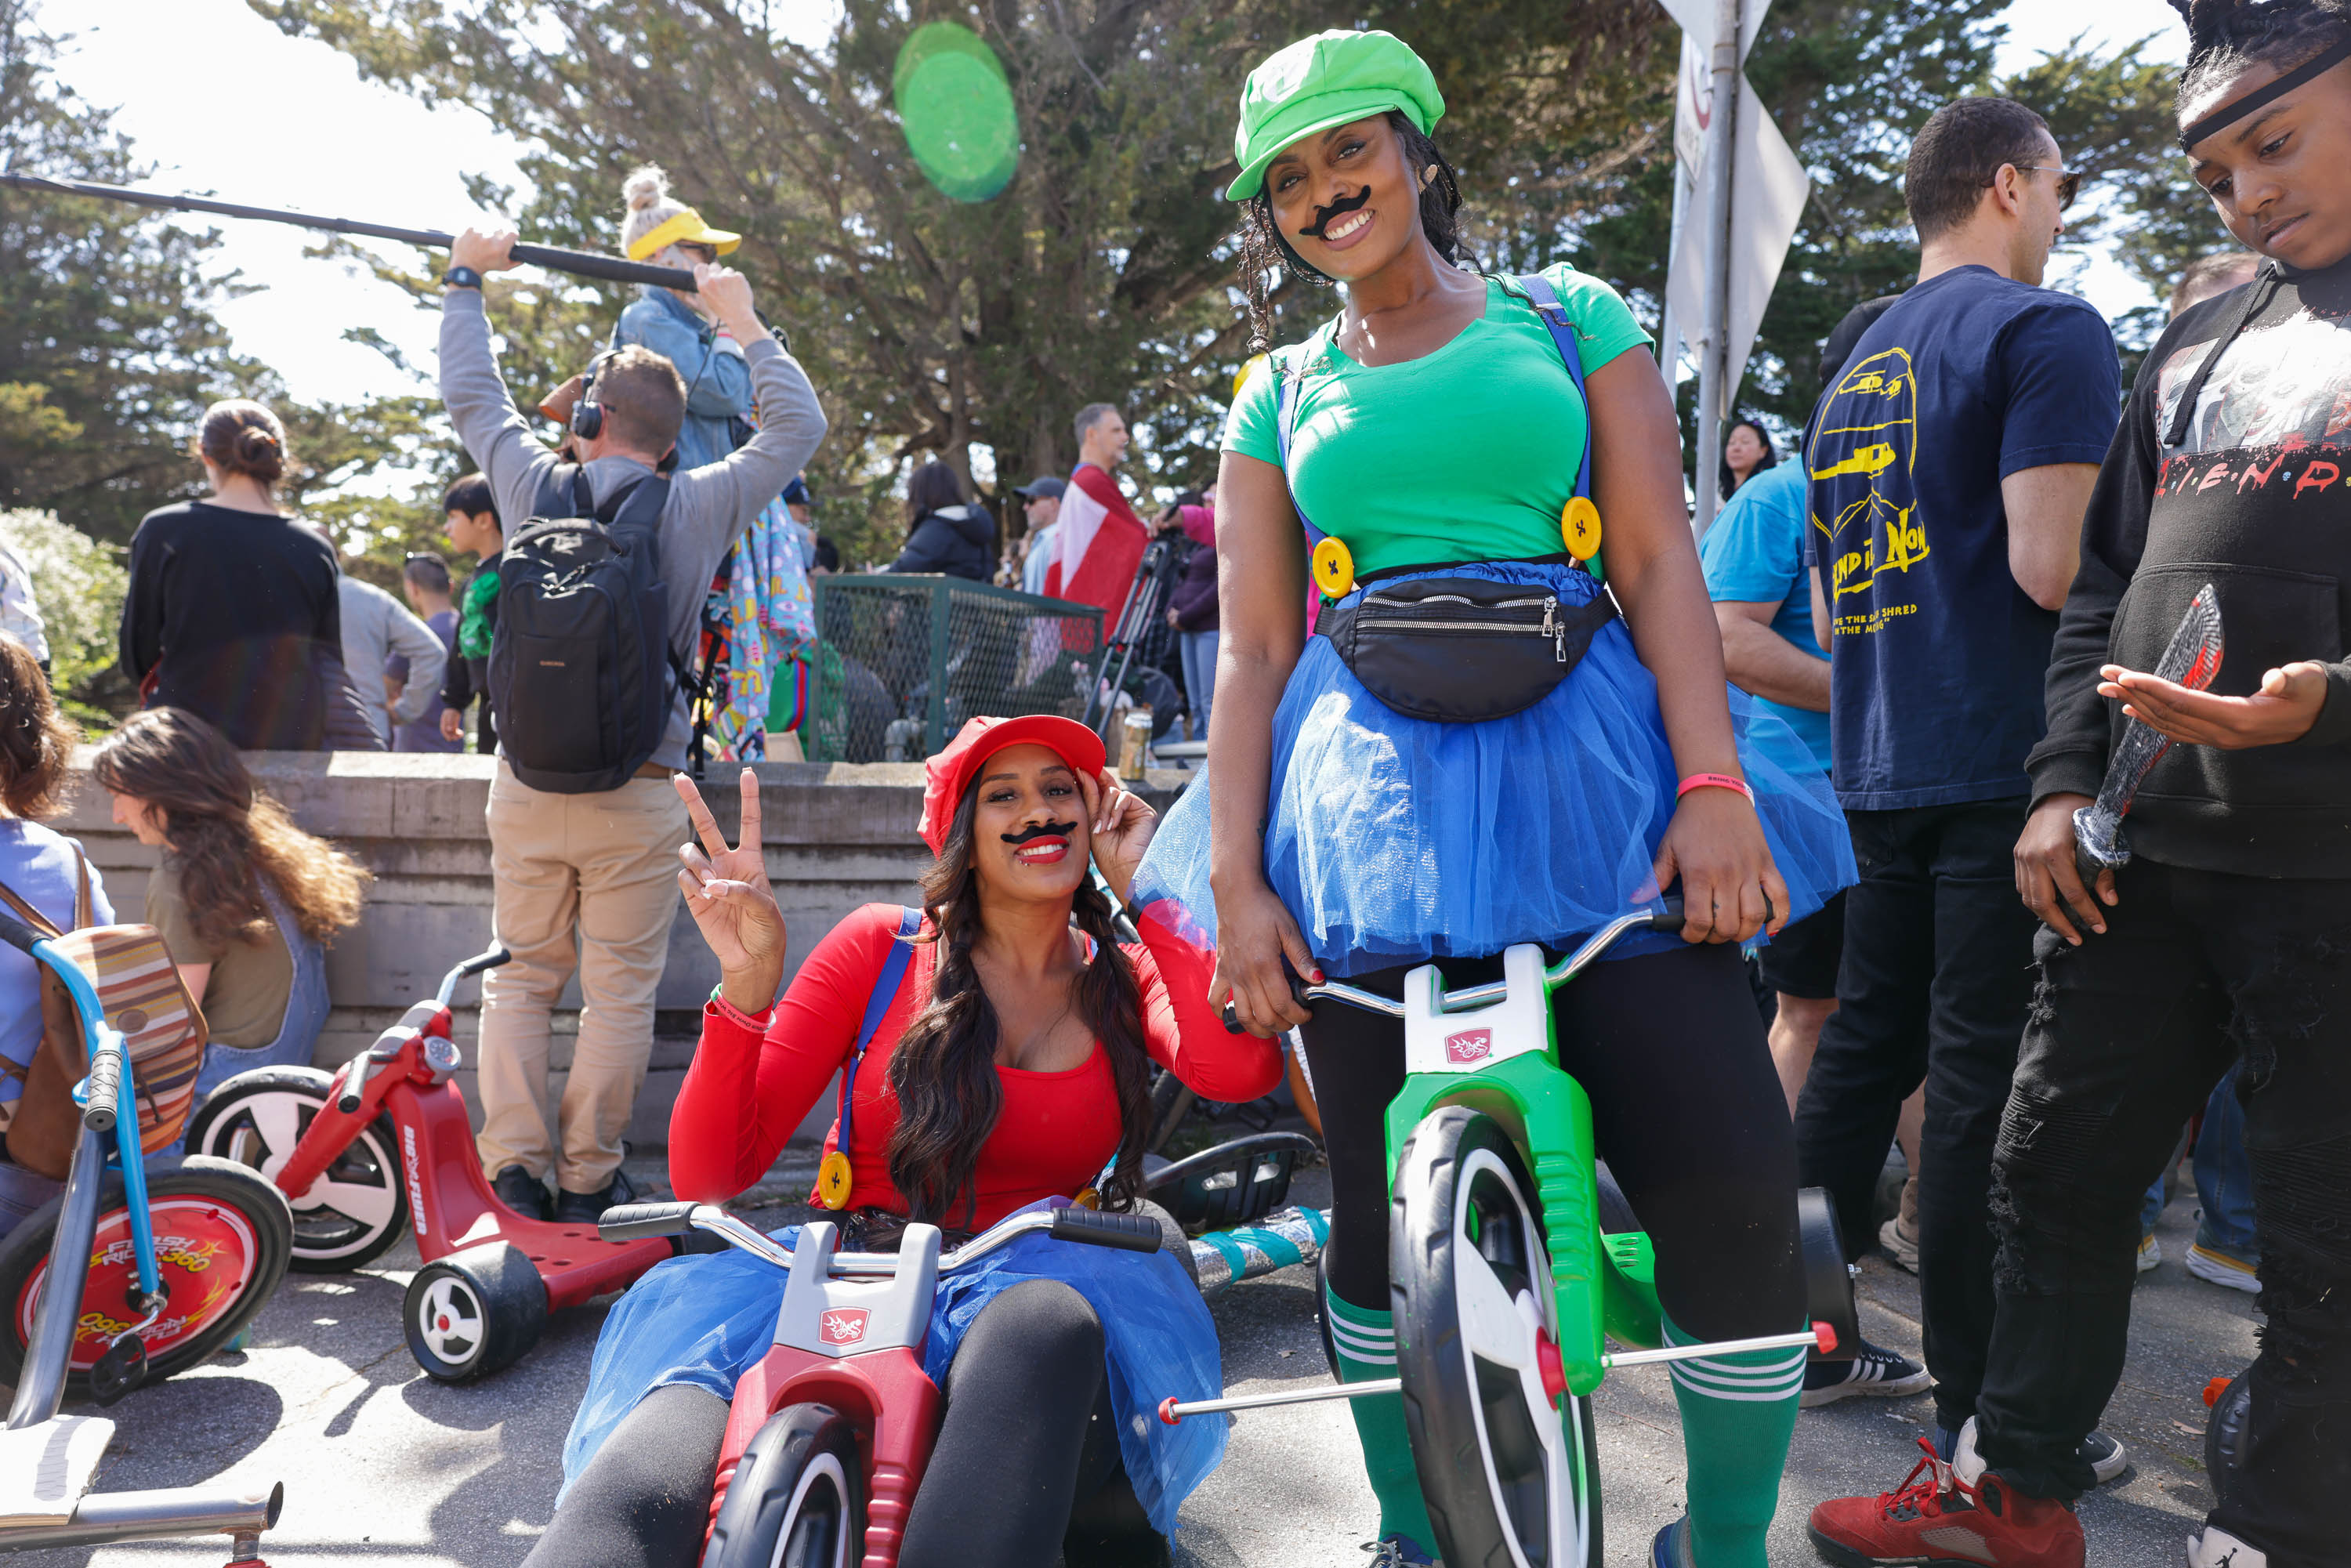 Two people dressed as Mario characters are riding tricycles; the scene appears to be outdoors at an event.